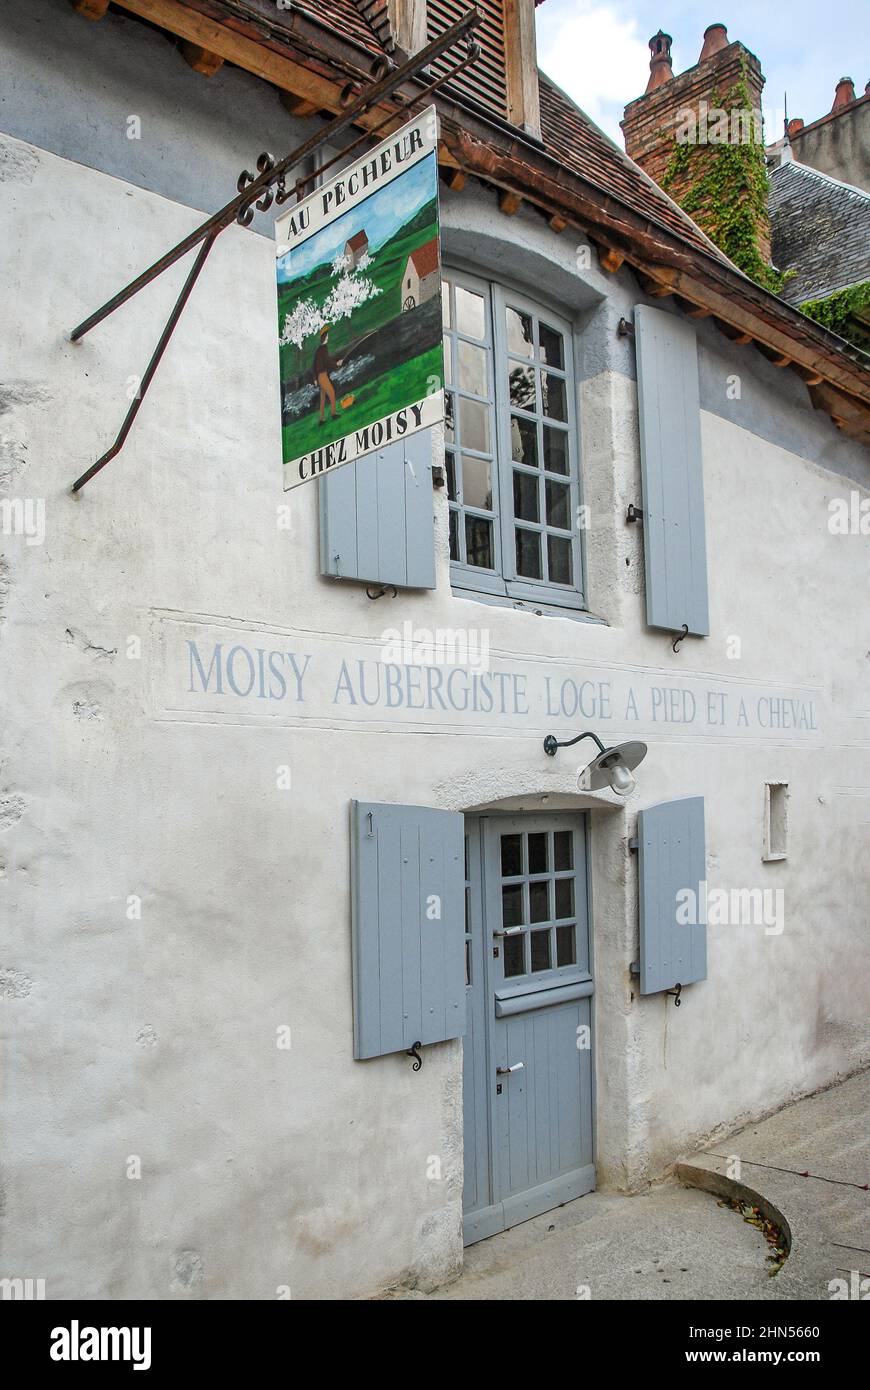 The auberge des Sœurs Moisy was made by painters whou met, slept and worked there at St-Céneri-le-Gérei, Normandy, France Stock Photo